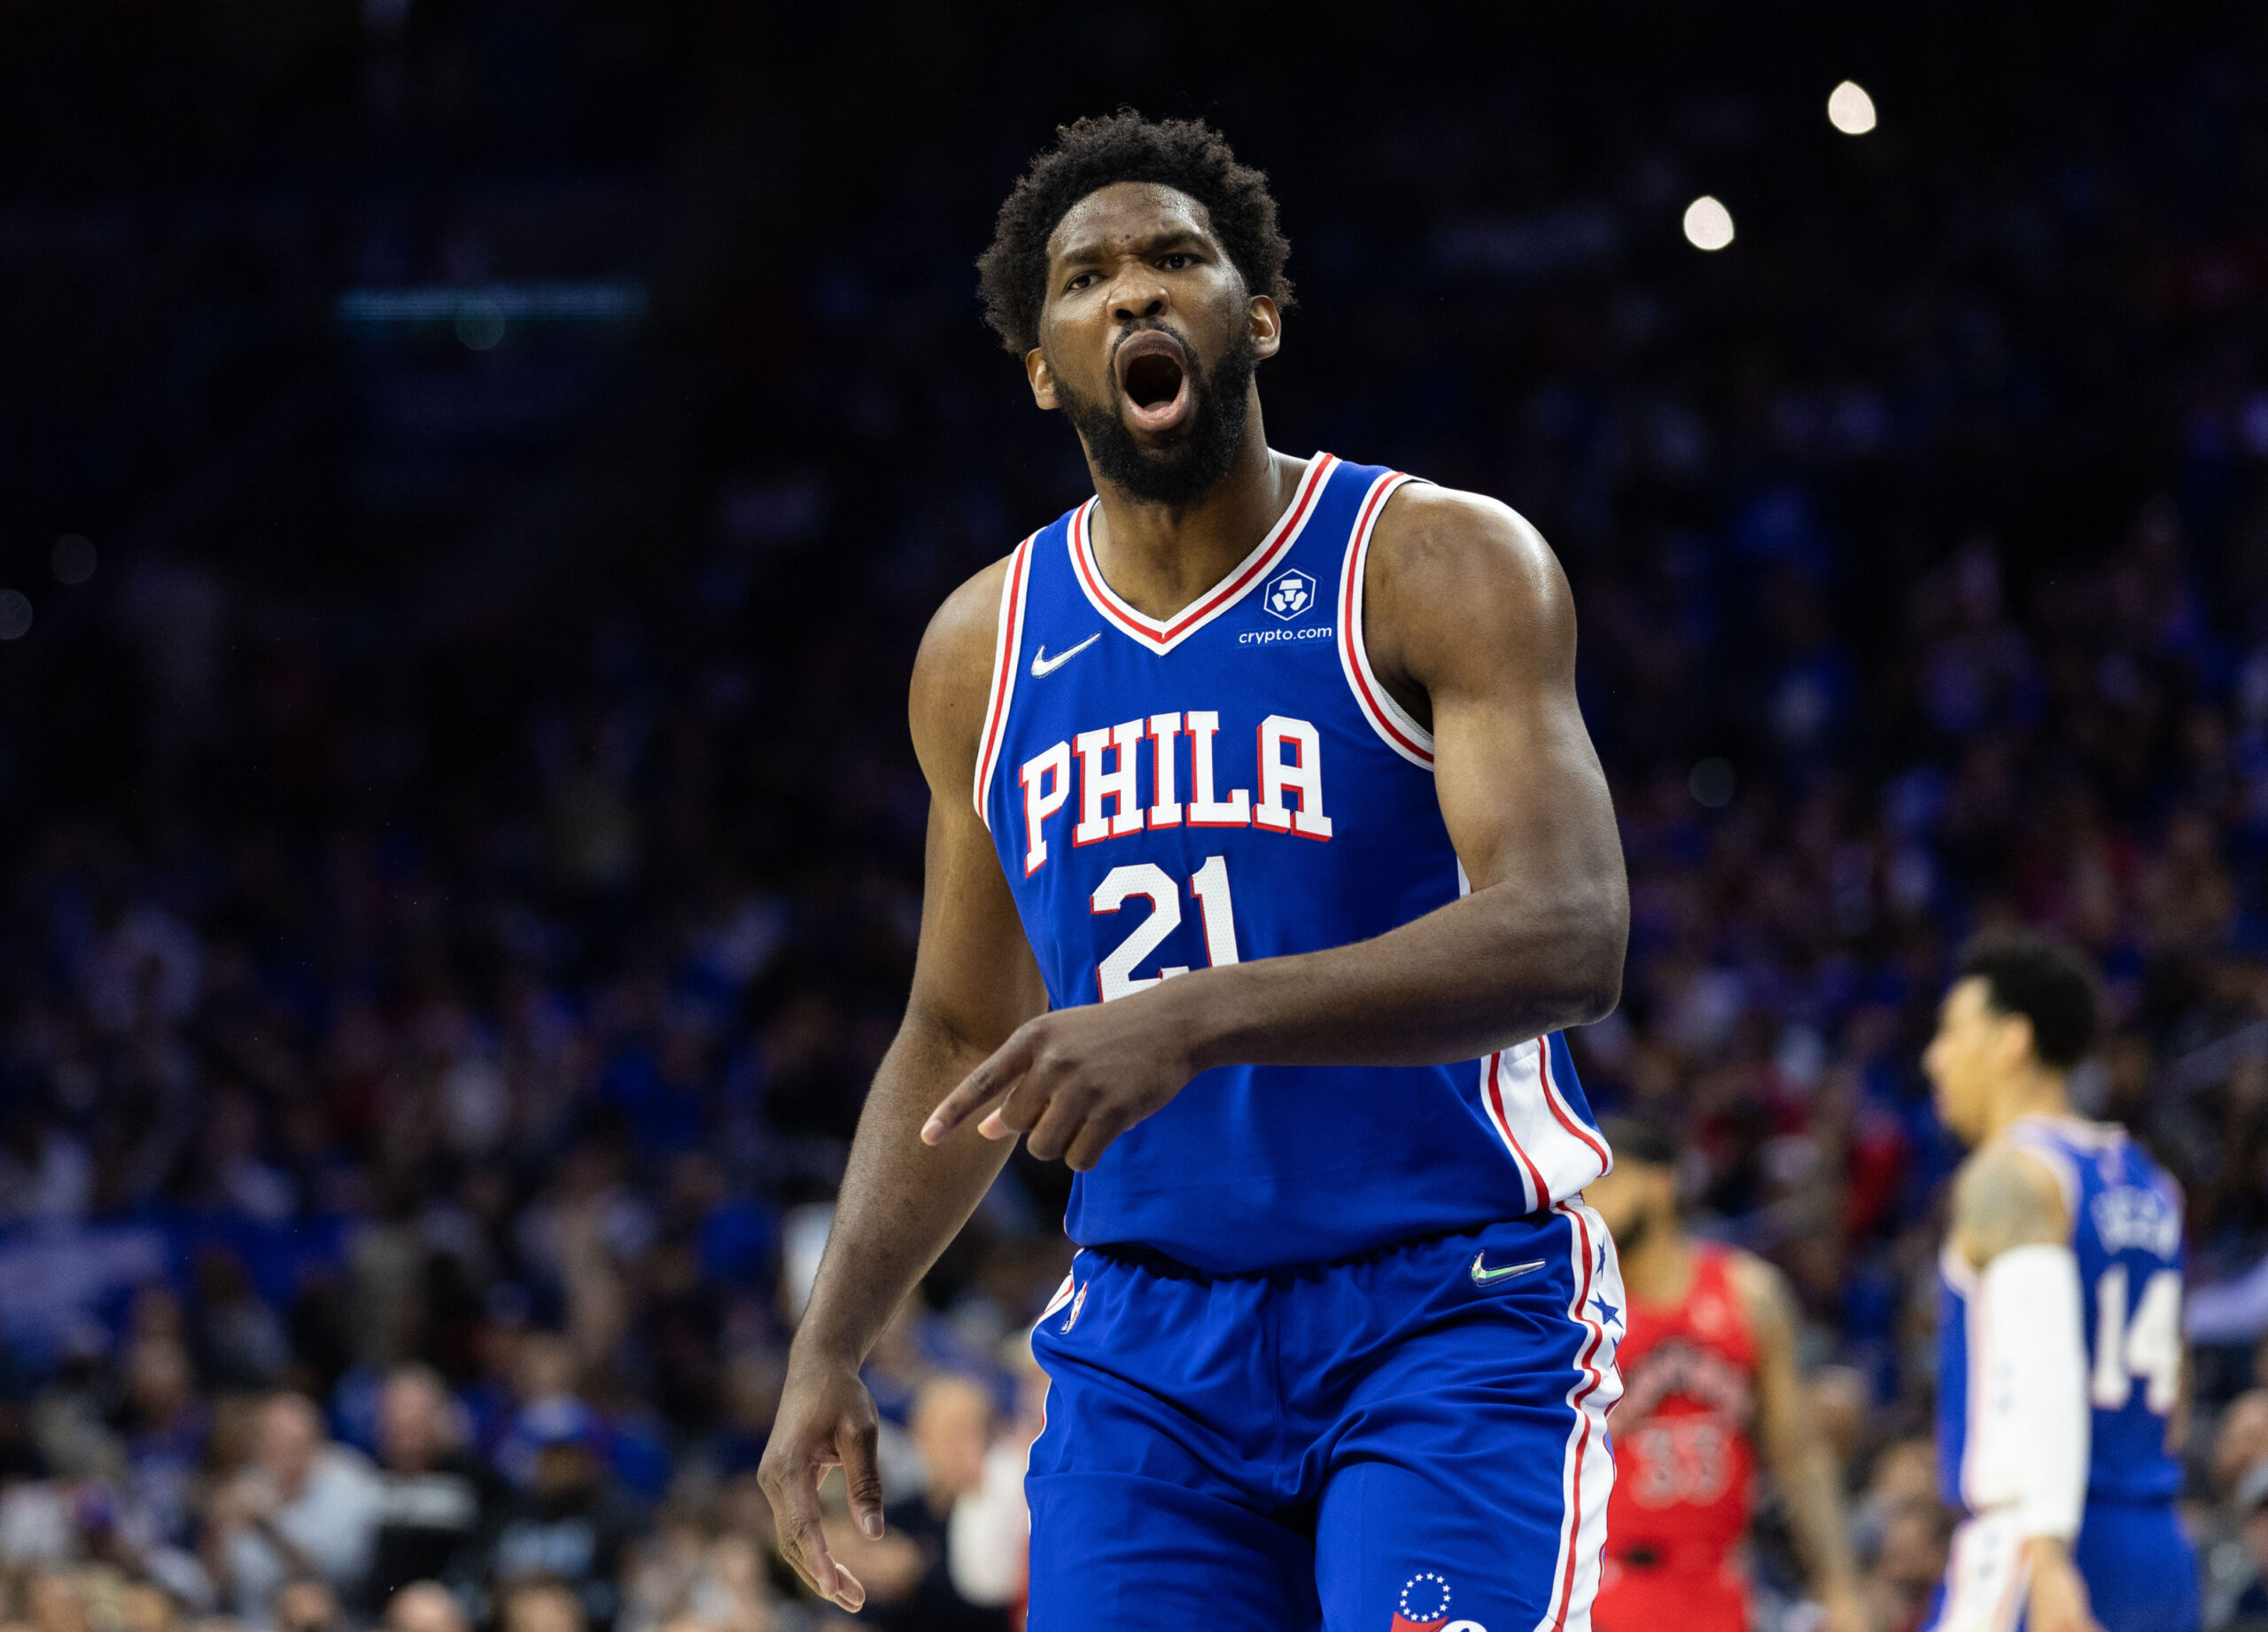 Apr 16, 2022; Philadelphia, Pennsylvania, USA; Philadelphia 76ers center Joel Embiid (21) reacts to an official after a play against the Toronto Raptors during the first quarter of game one of the first round for the 2022 NBA playoffs at Wells Fargo Center. Mandatory Credit: Bill Streicher-USA TODAY Sports